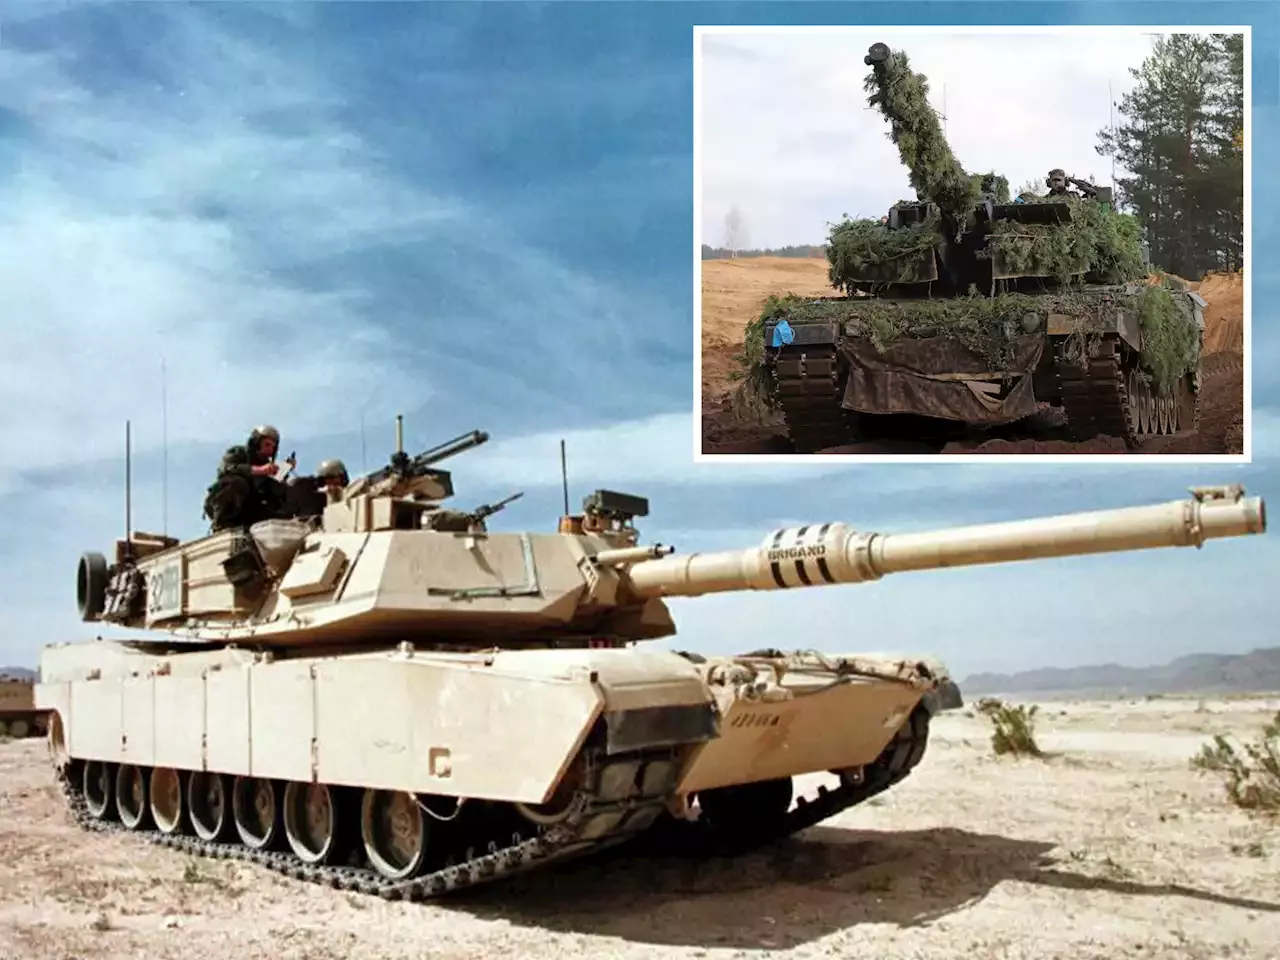 How Germany's Leopard 2 tanks compare to U.S. M1 Abrams